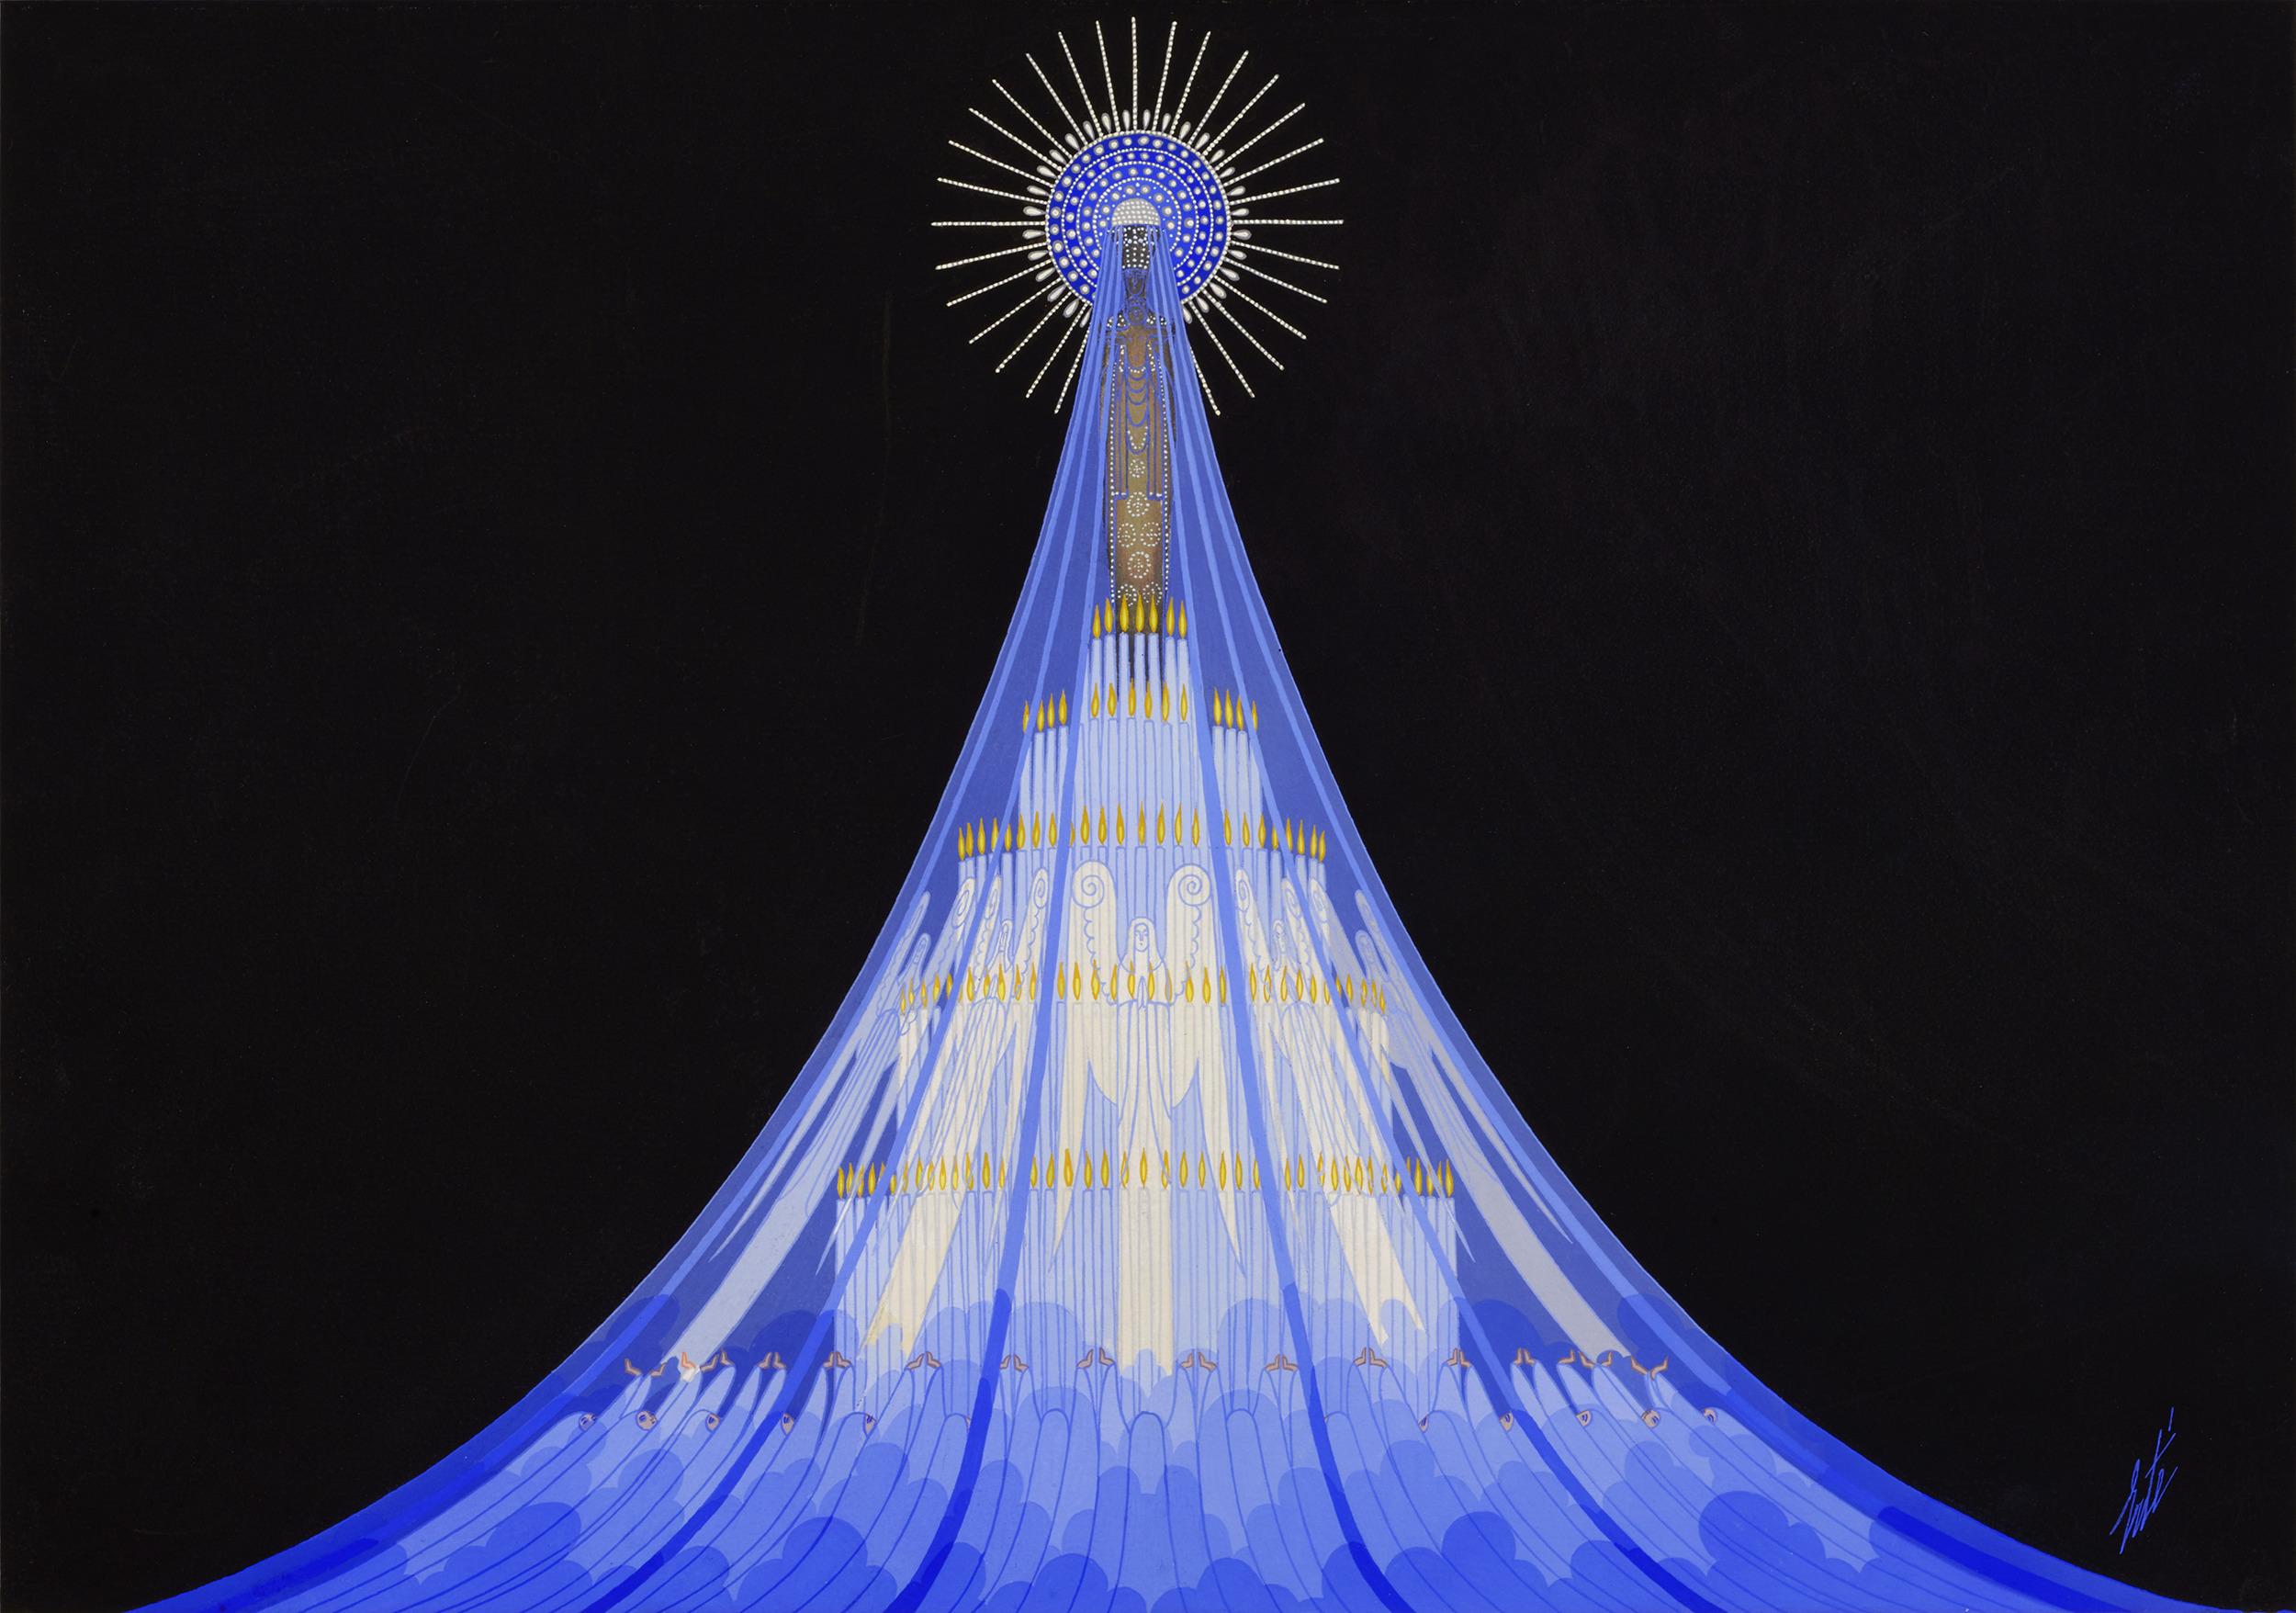 Erté (Romain de Tirtoff)
1892-1990  Russian-French
Ave Maria

Signed 